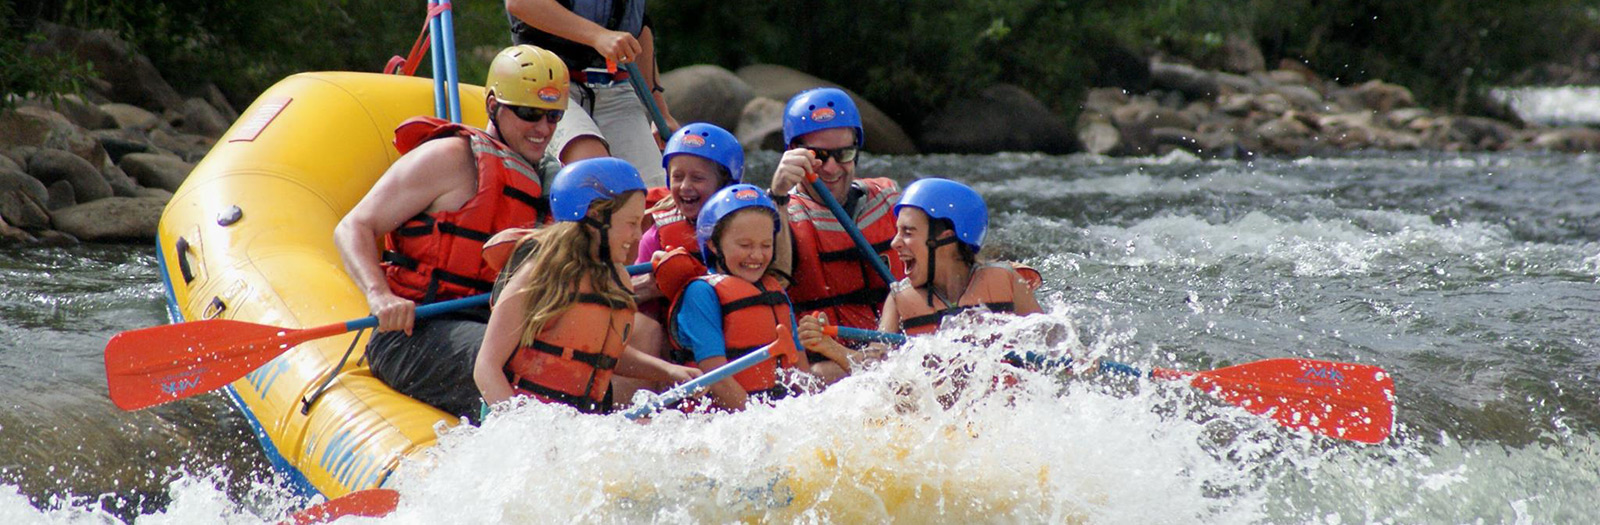 river rafting in vail